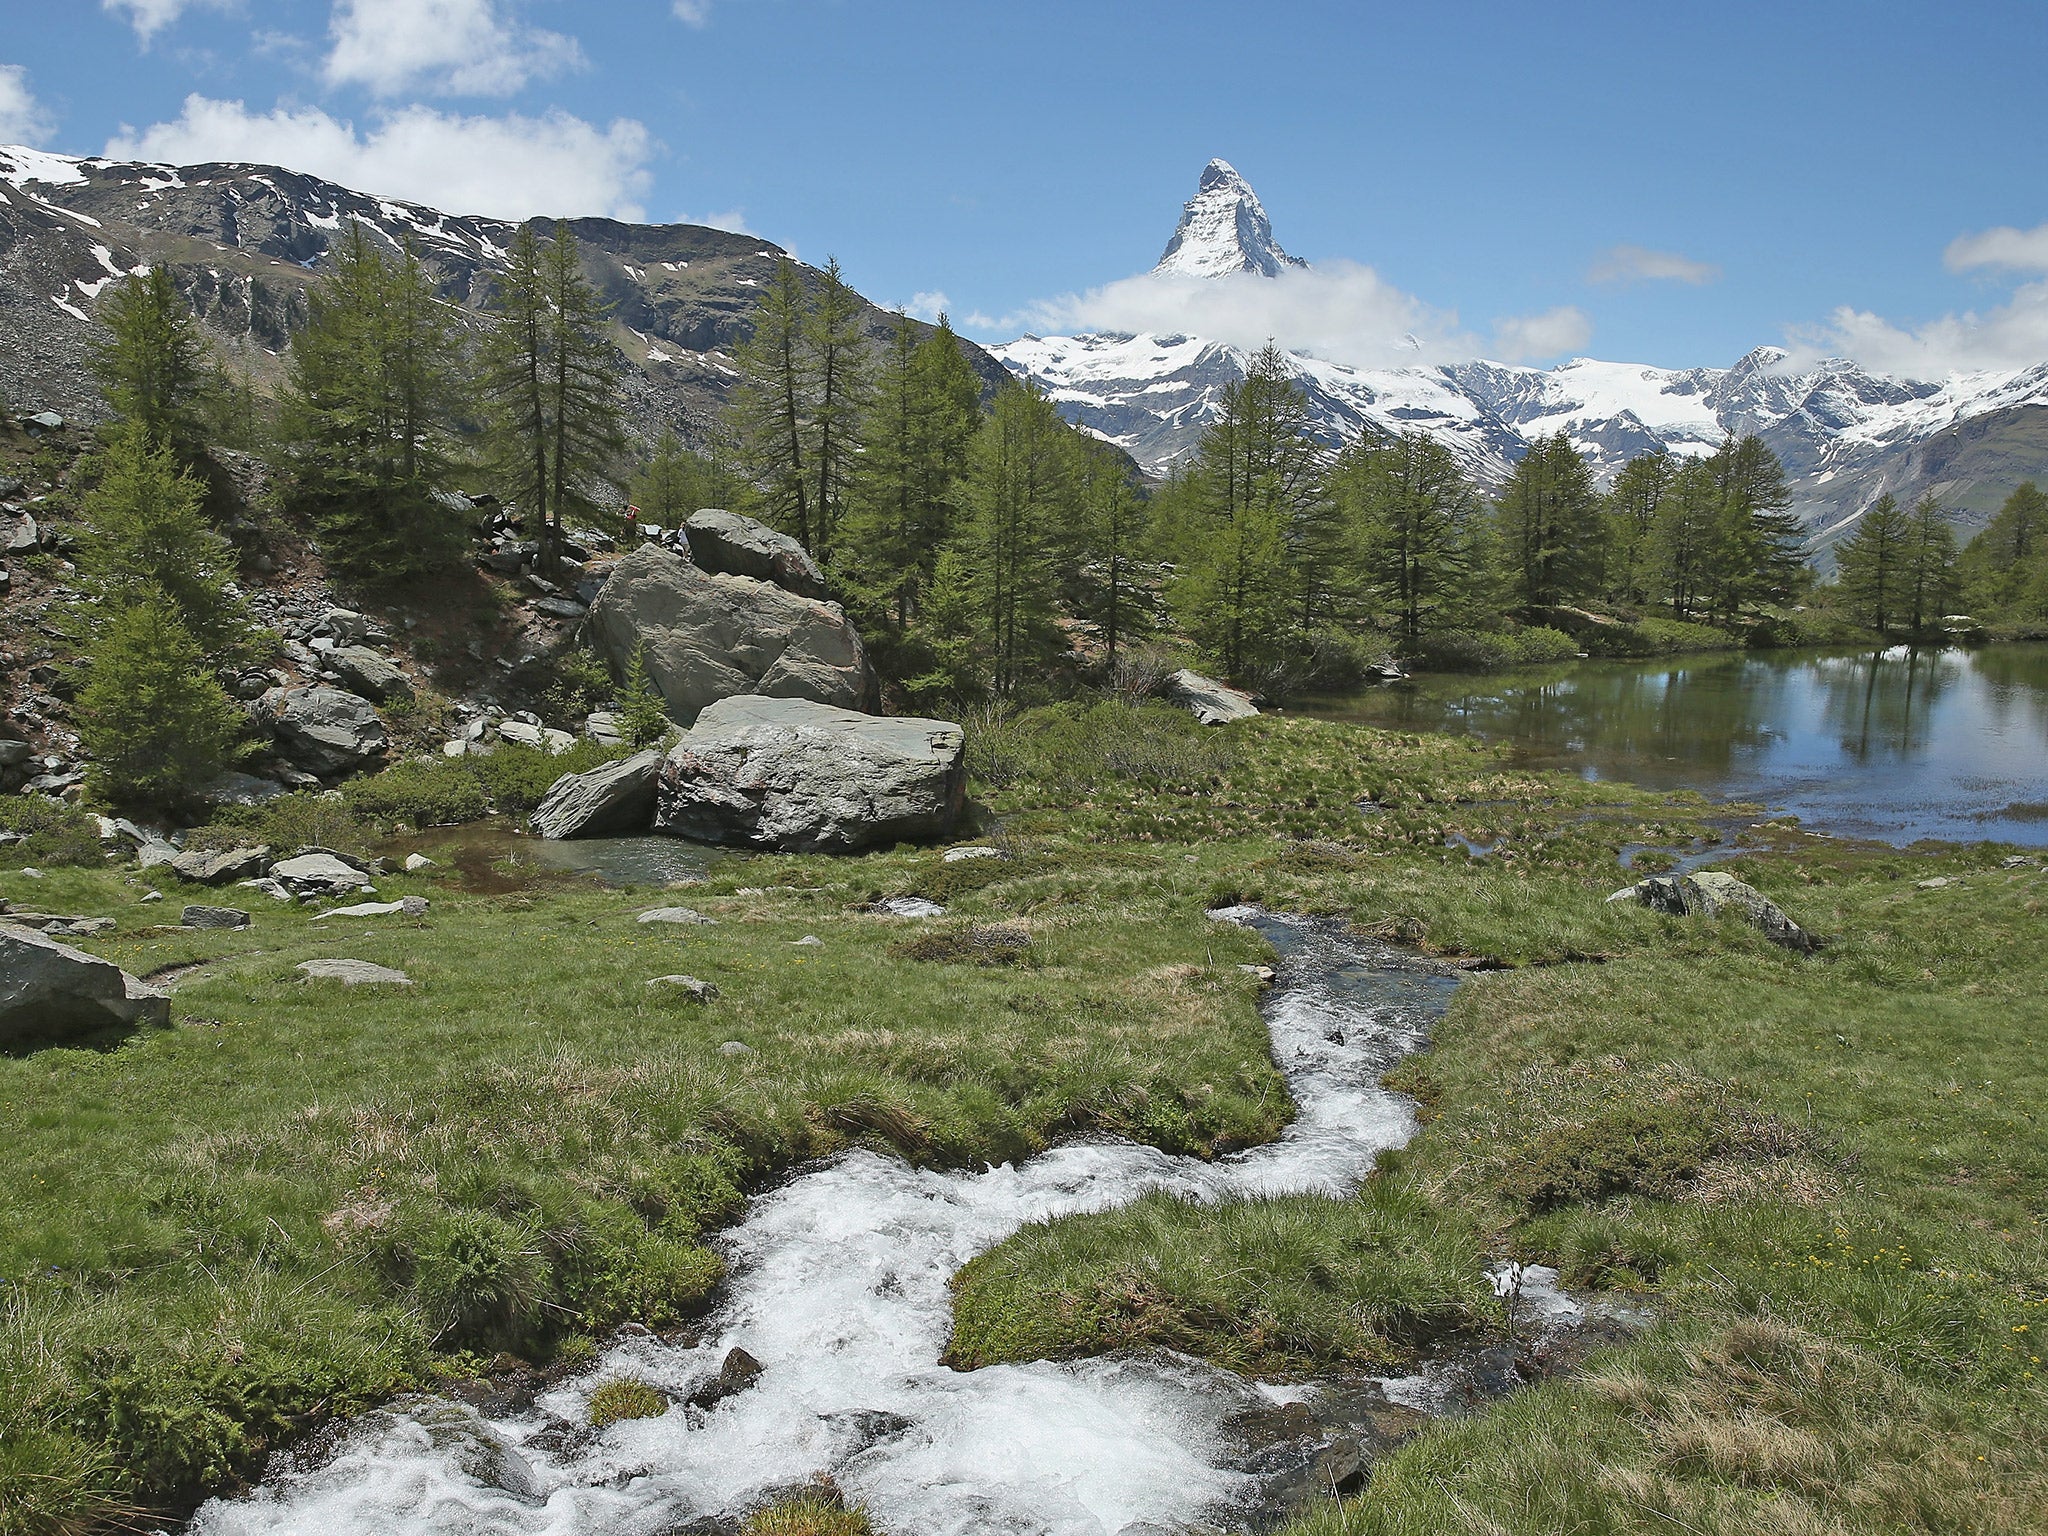 A small stream leads to a lake near the Matterhorn mountain in Switzerland